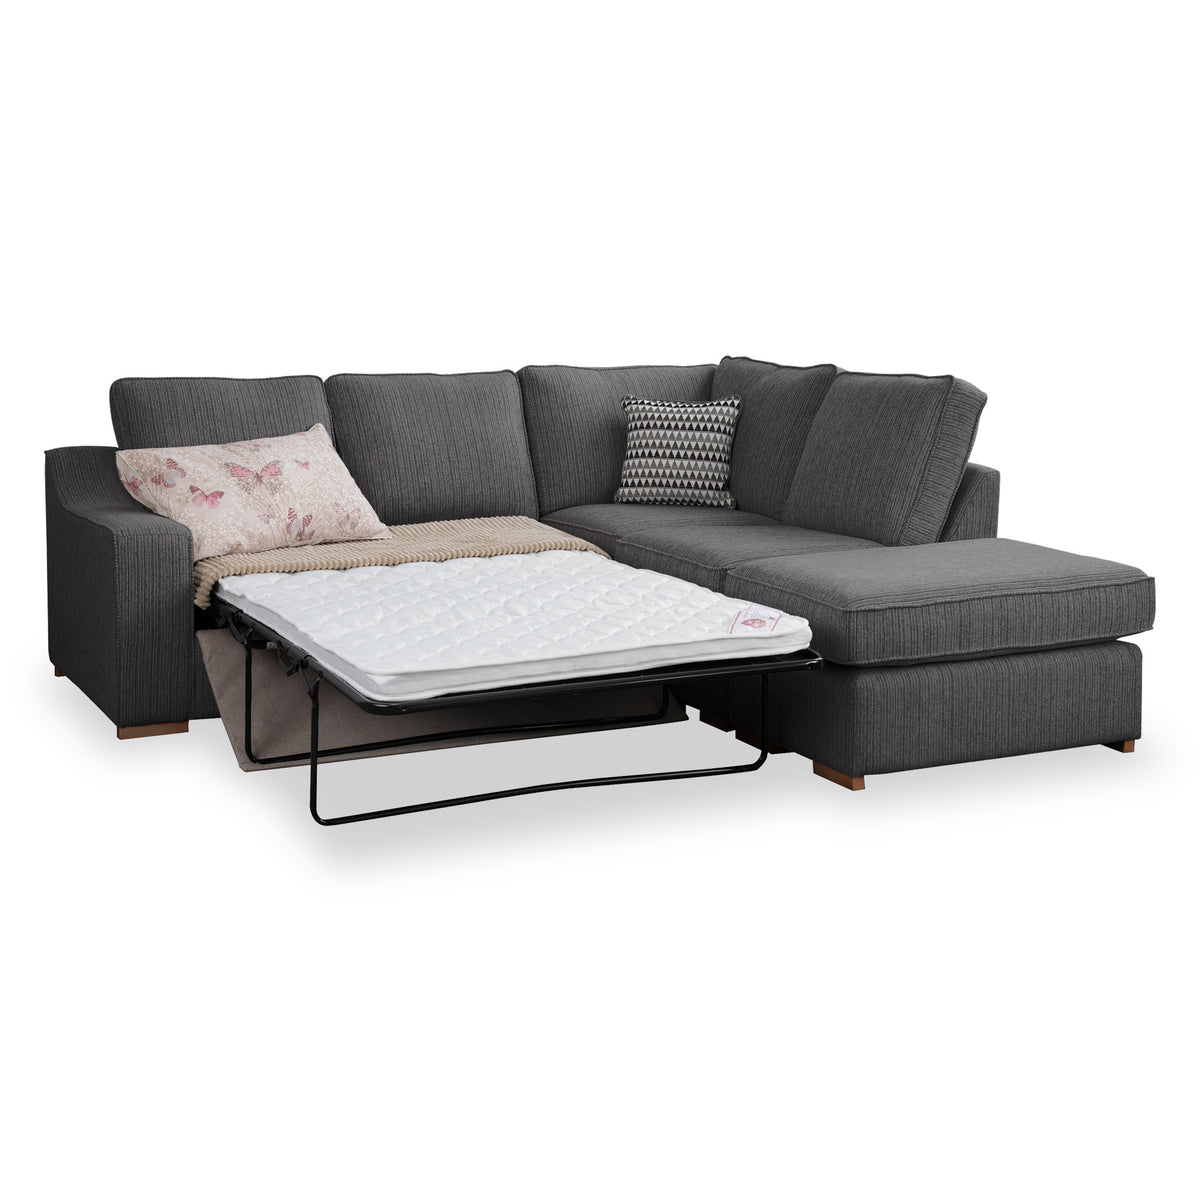 Ashow Charcoal Right Hand Corner Sofabed with Maika Dusk Scatter Cushions from Roseland furniture